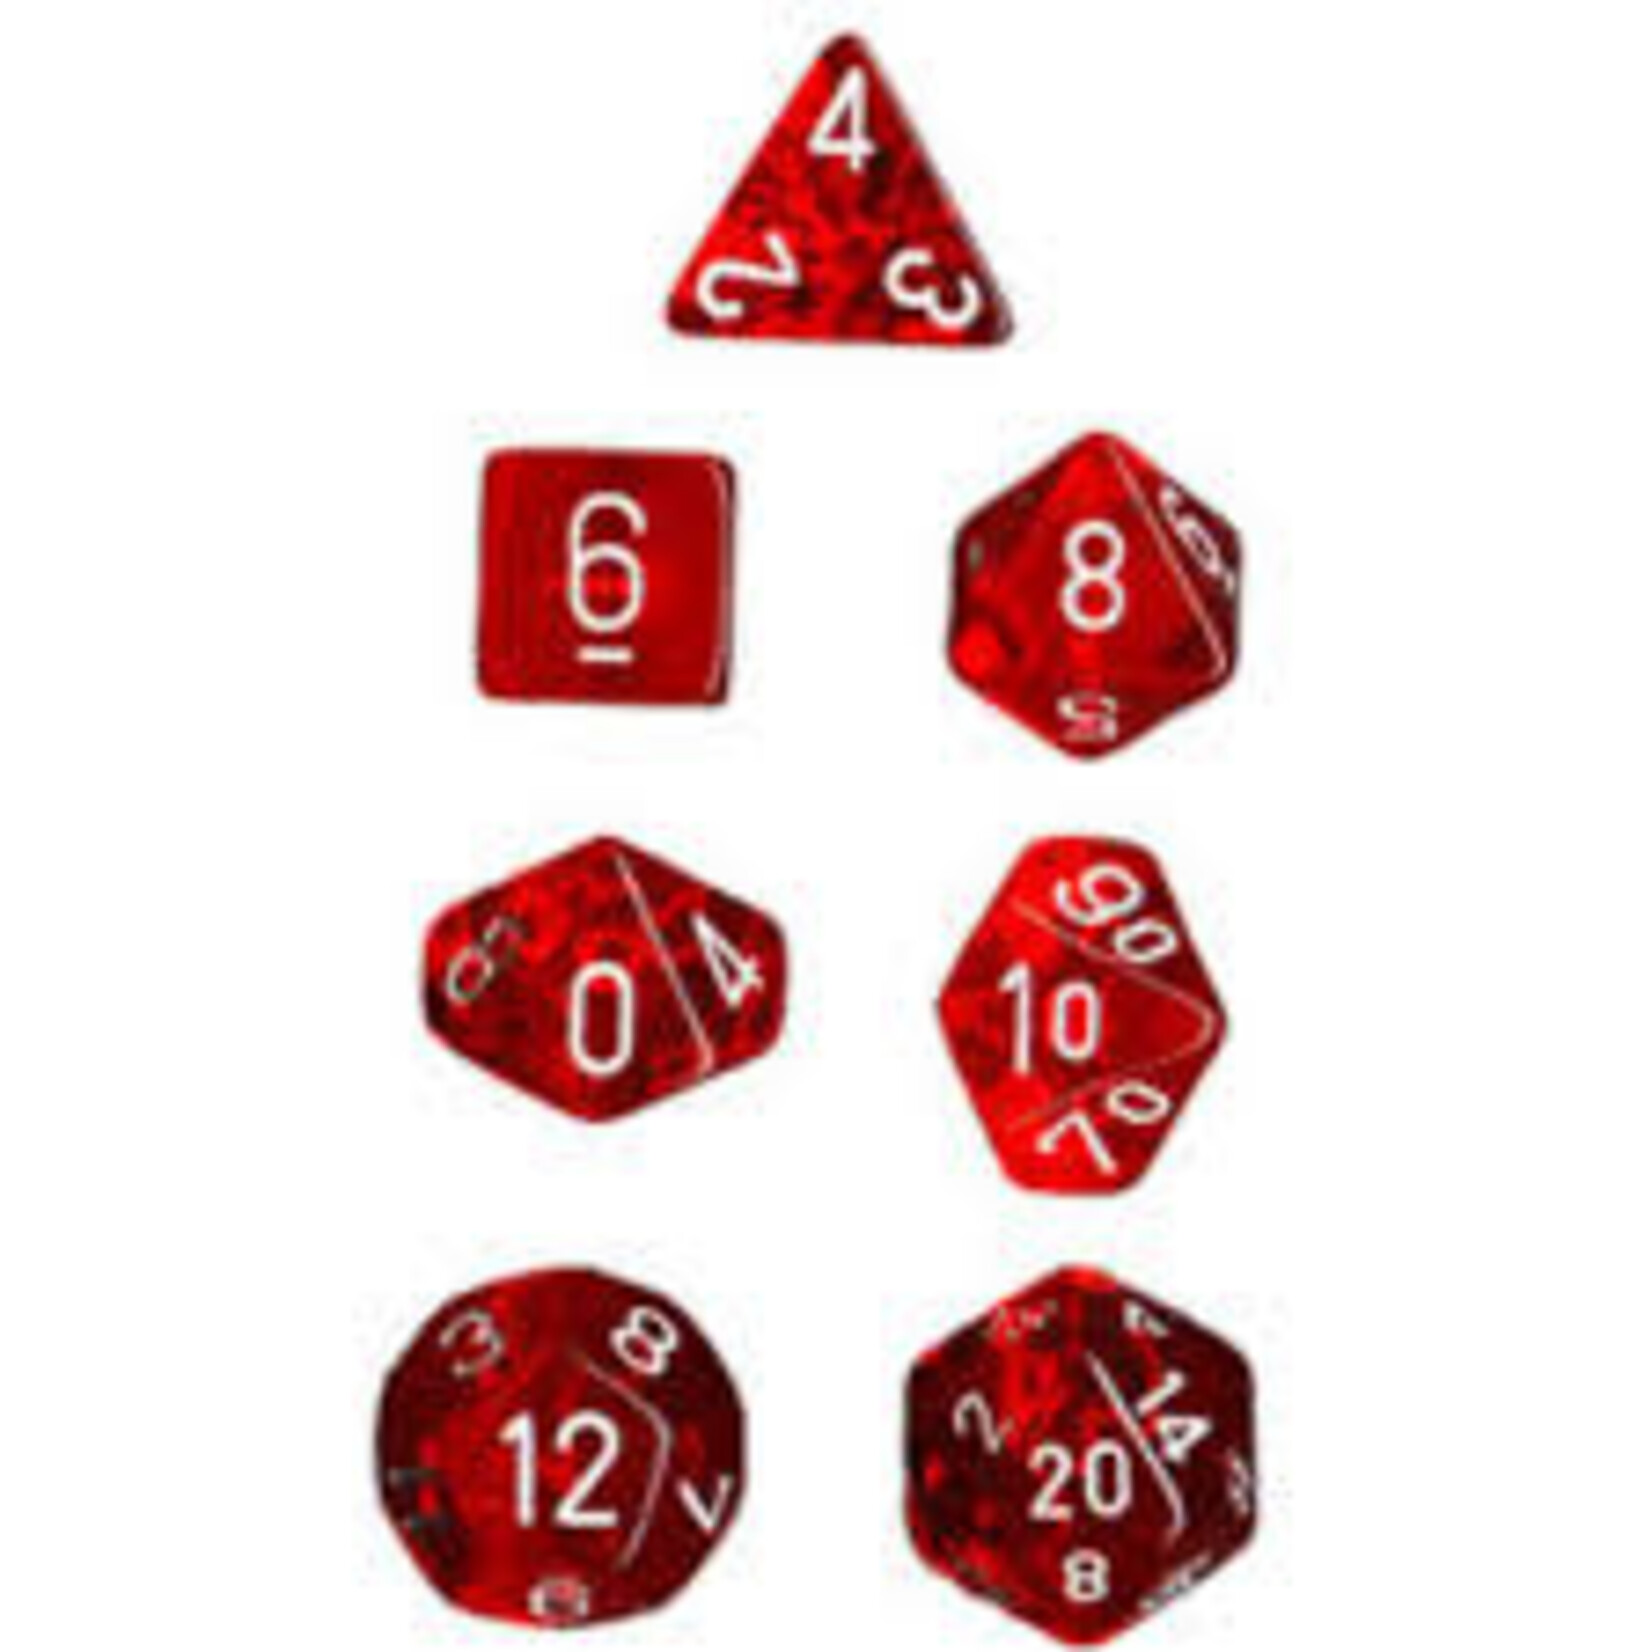 Chessex Translucent Red/white Polyhedral 7-Dice Set